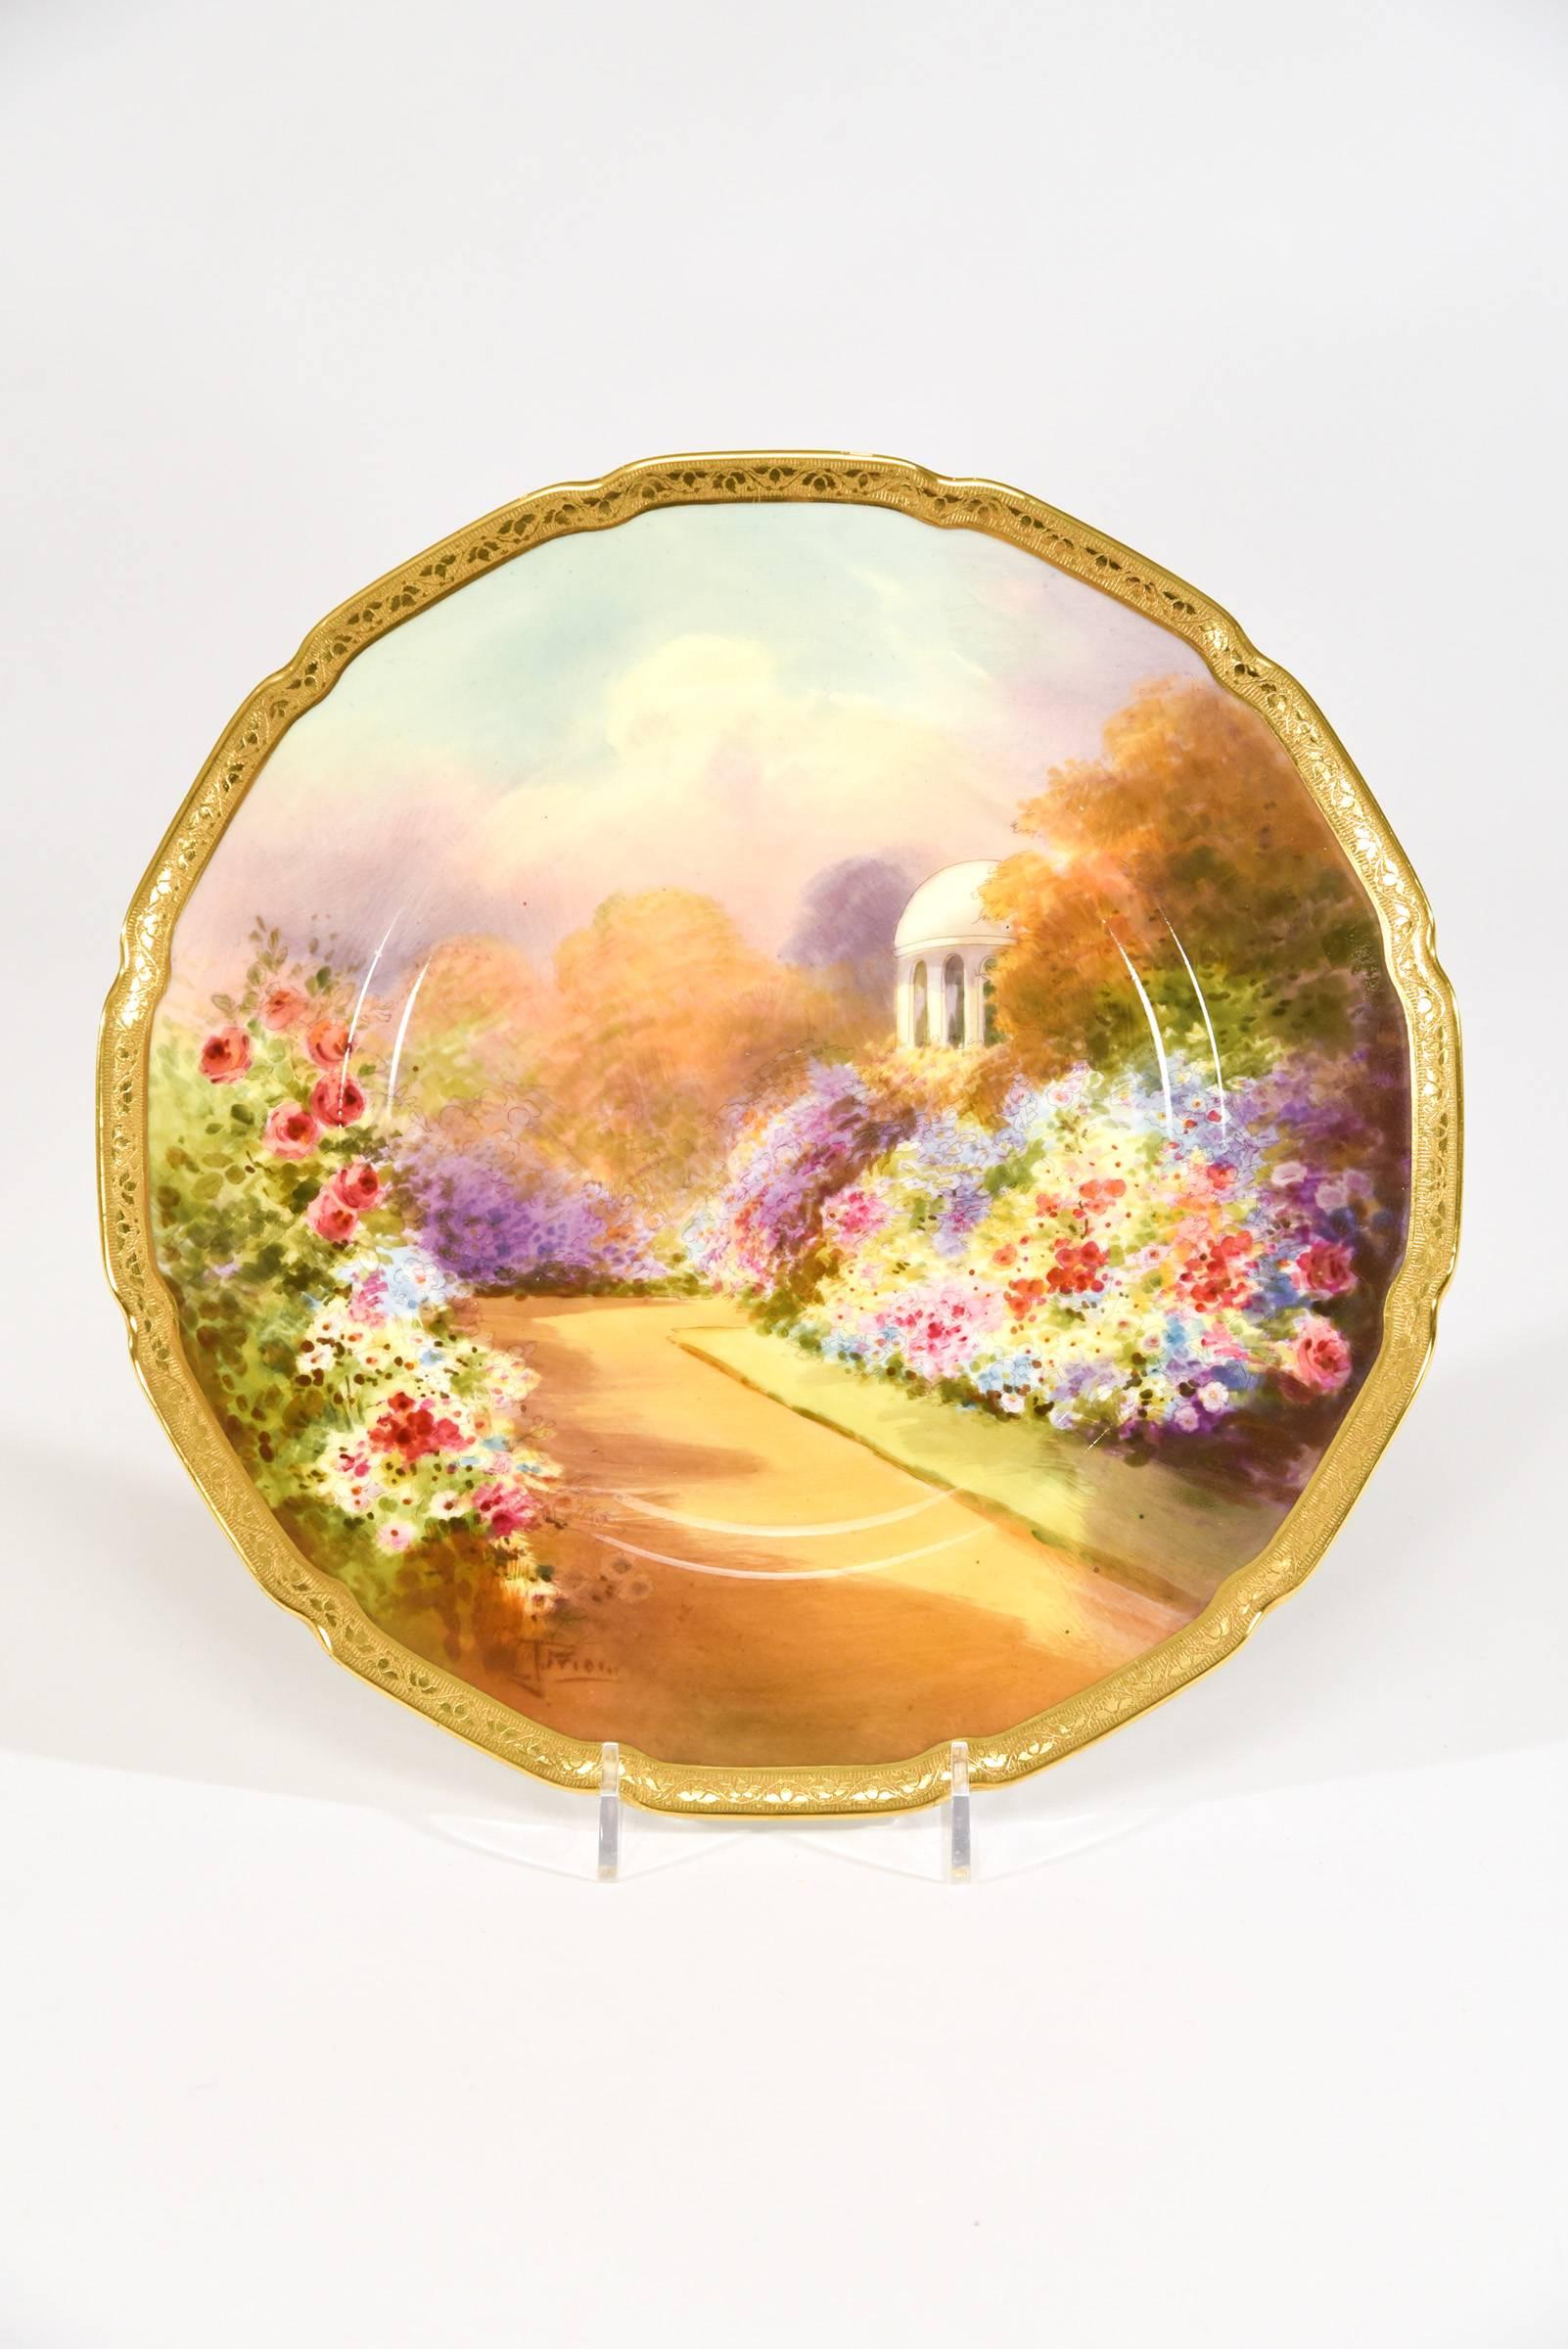 Porcelain Set of 12 Royal Doulton Scenic Hand-Painted Artist Signed Garden Plates W/ Gold For Sale